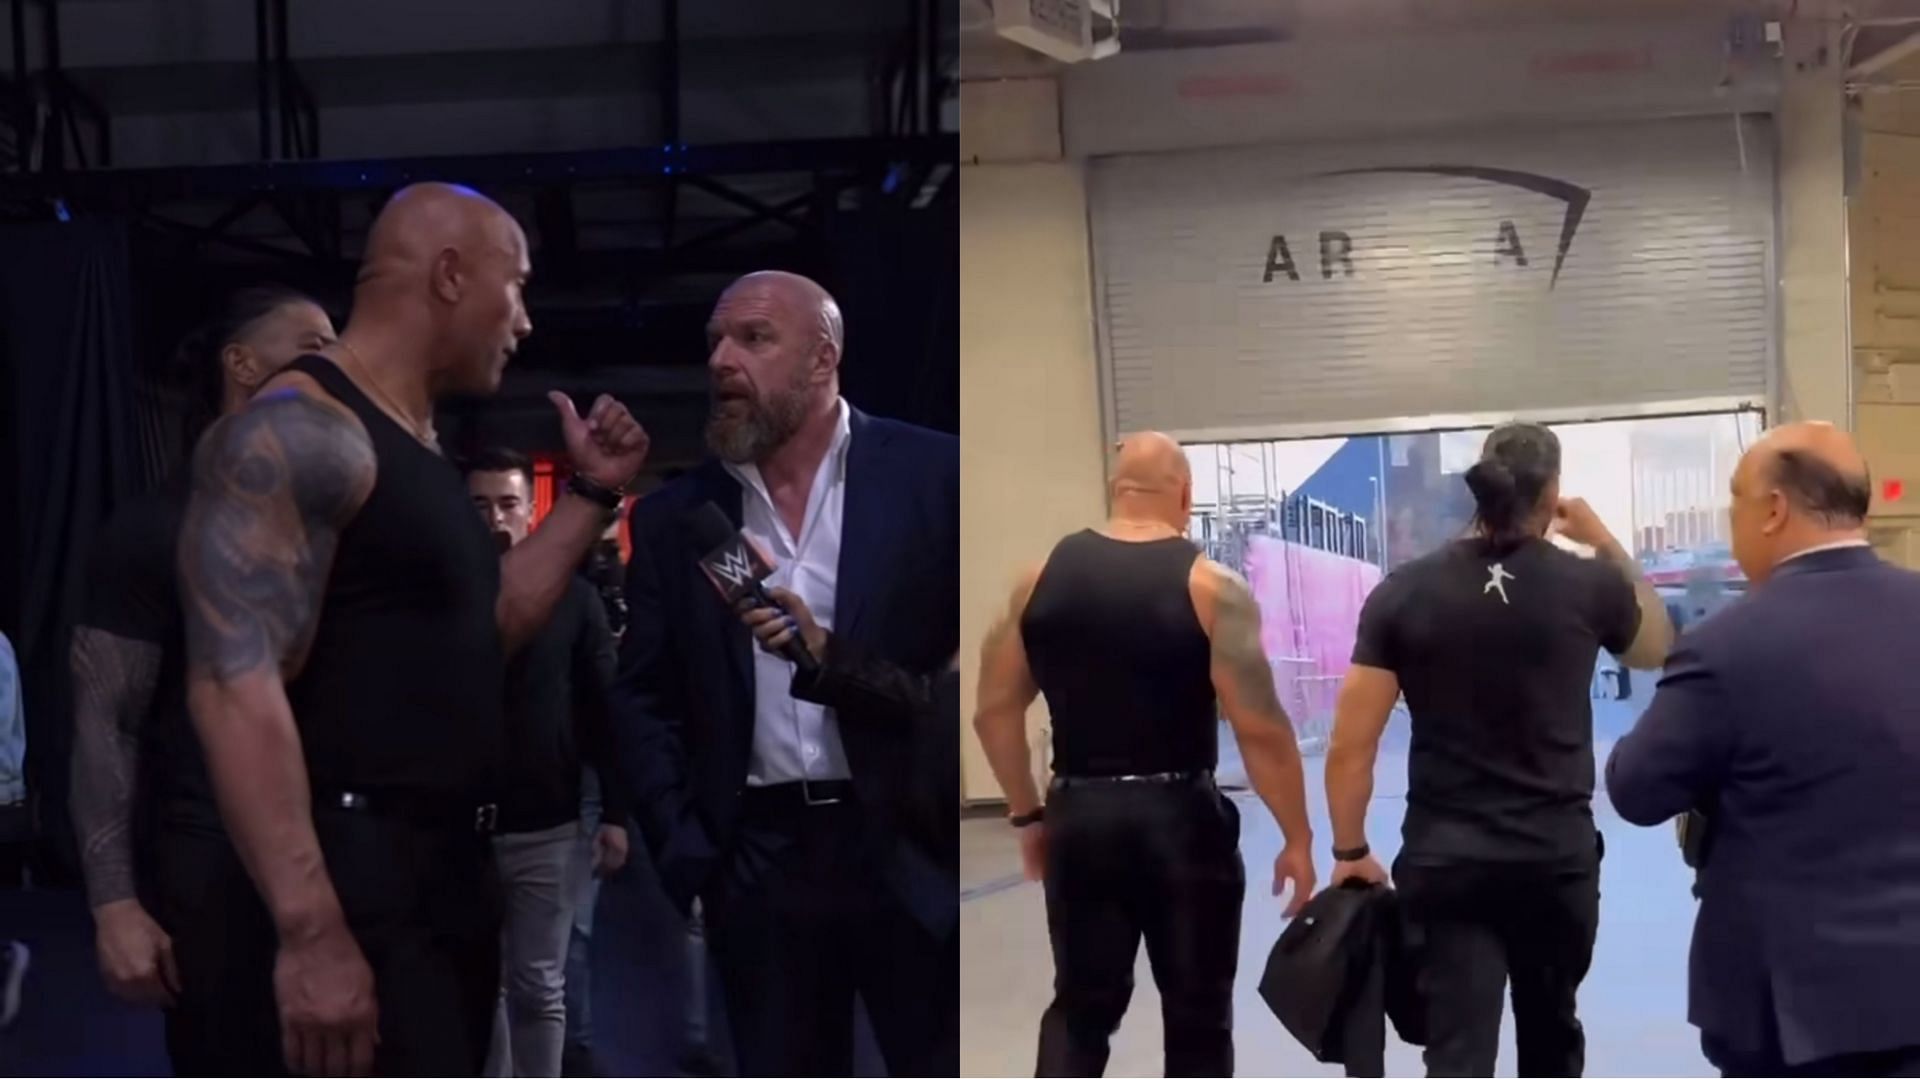 The Rock and Roman Reigns joined forces at the end of media event!